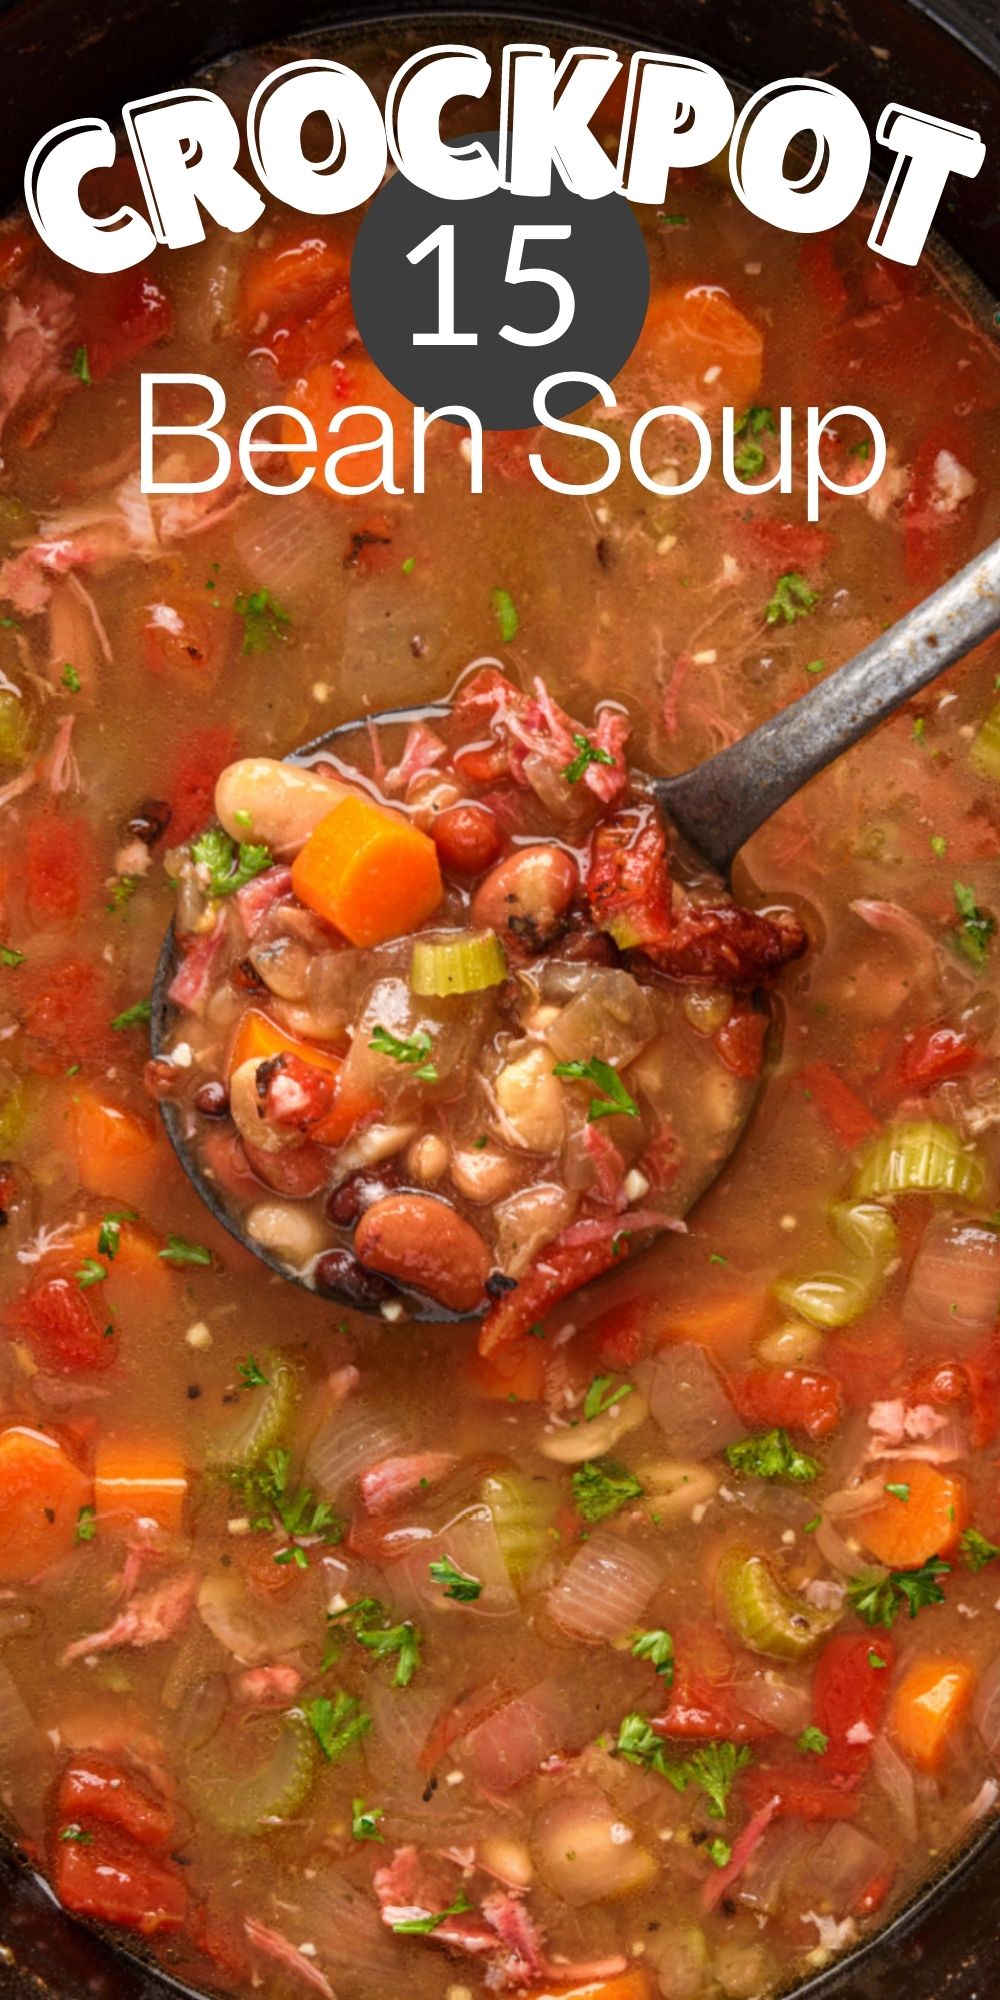 This Crockpot 15 Bean Soup Recipe is a comforting, flavorful slow cooker soup with ham, baby beans and vegetables. via @familyfresh